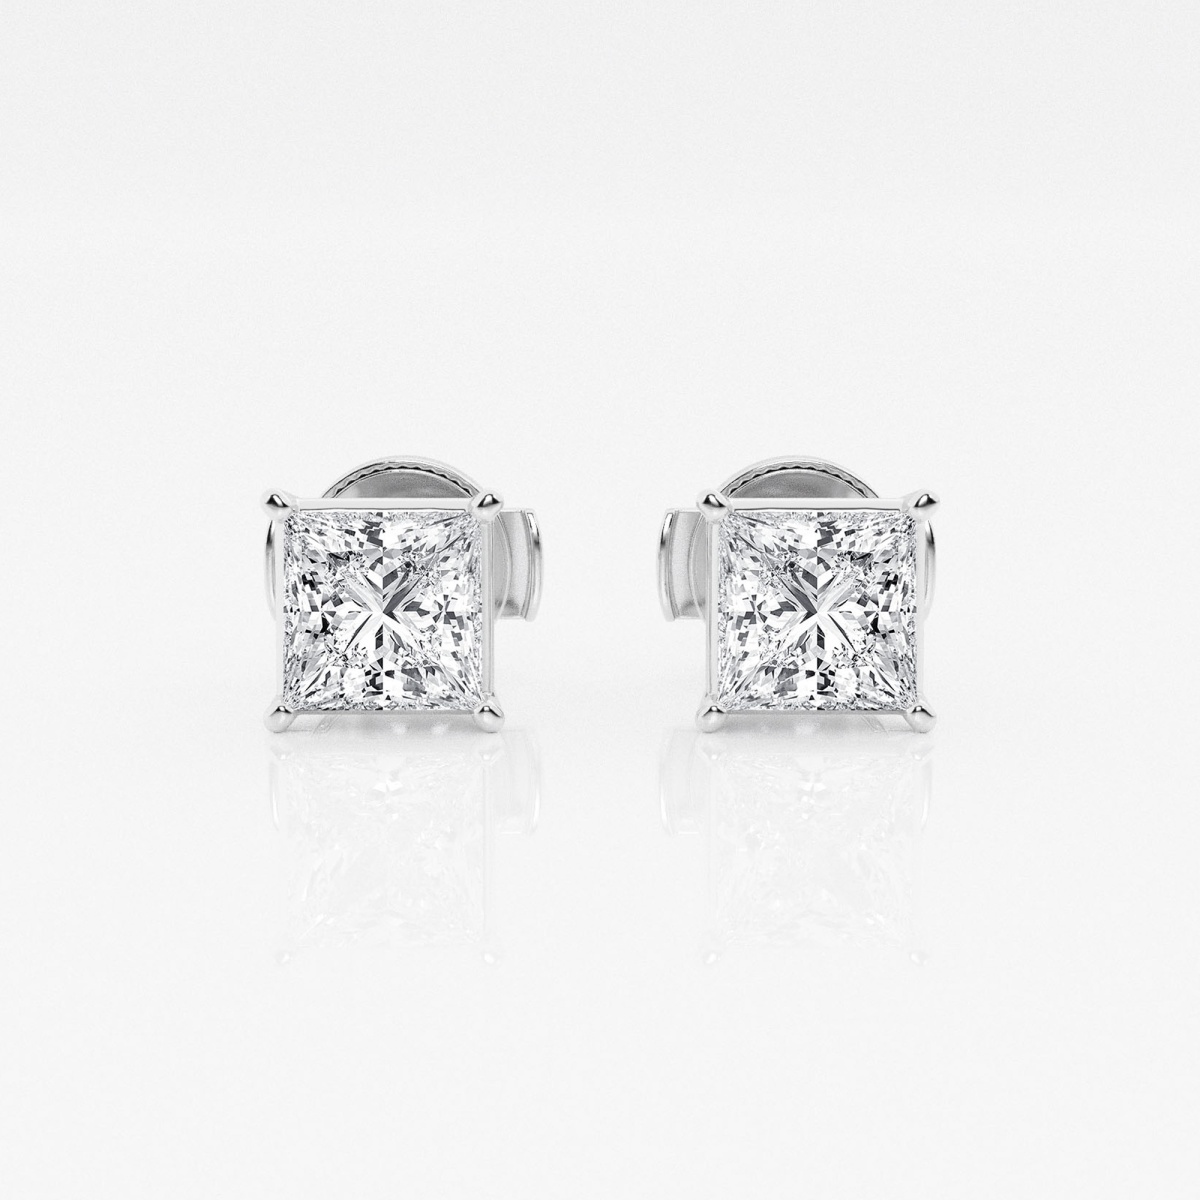 Additional Image 2 for  1 1/2 ctw Princess Lab Grown Diamond Solitaire Certified Stud Earrings